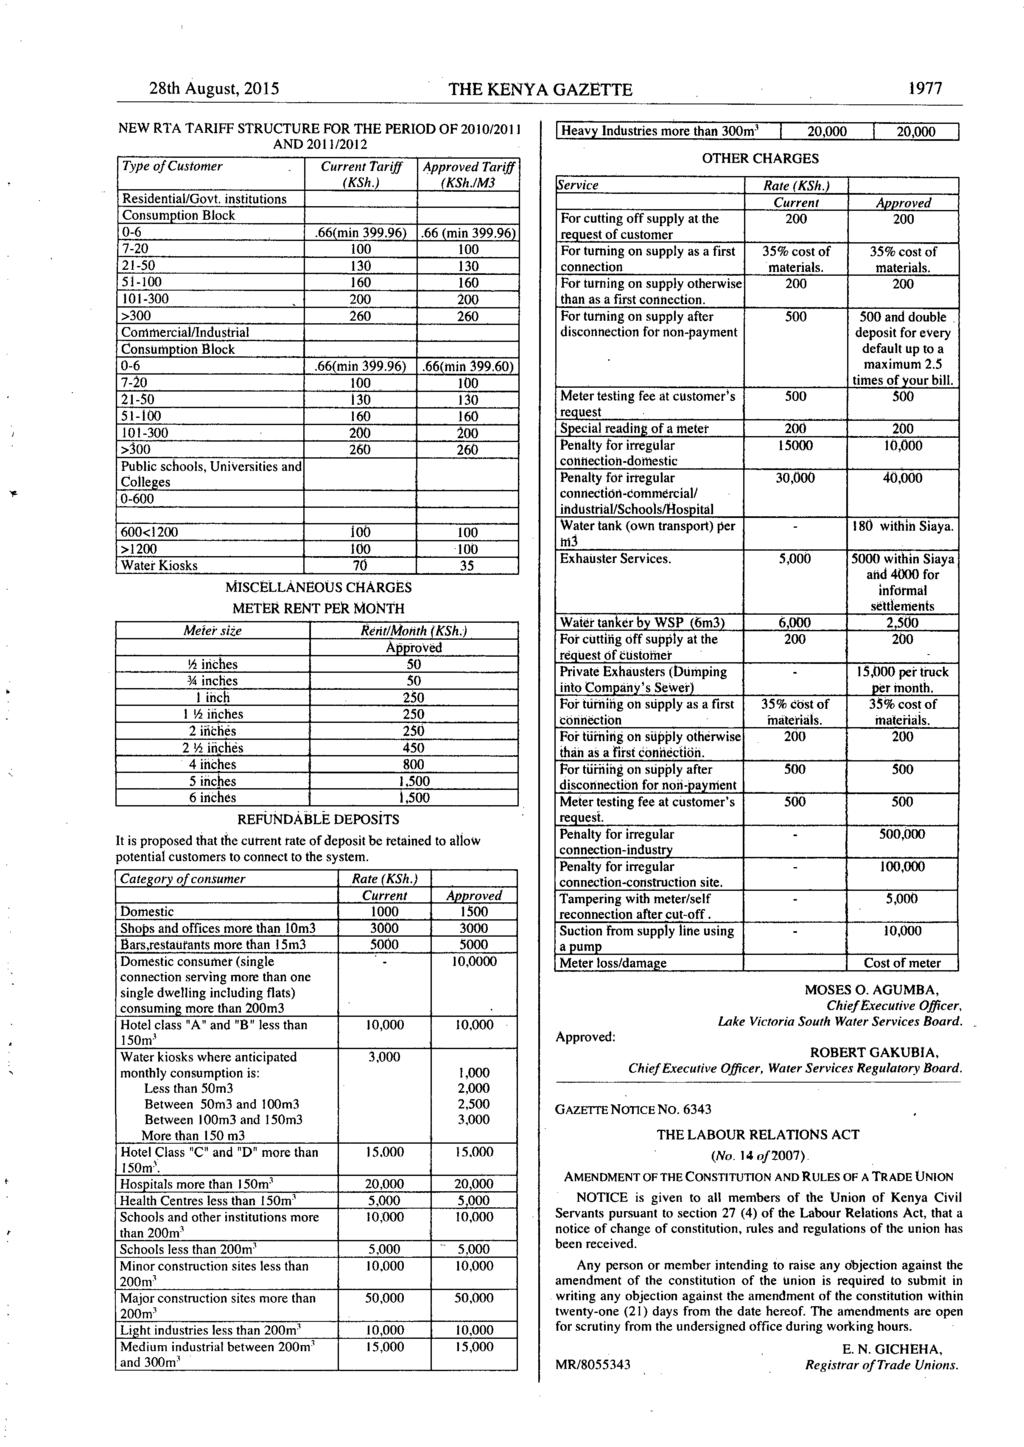 28 August, 2015 1 THE KENYA GAZETTE 1977 NEW RTA TARIFF STRUCTURE FOR THE PERIOD OF 2010/2011 AND 2011/2012 es more than 300m-' 1 20,000 J 20,000 OTHER CHARGES MISCELLANEOUS CHARGES METER RENT PER